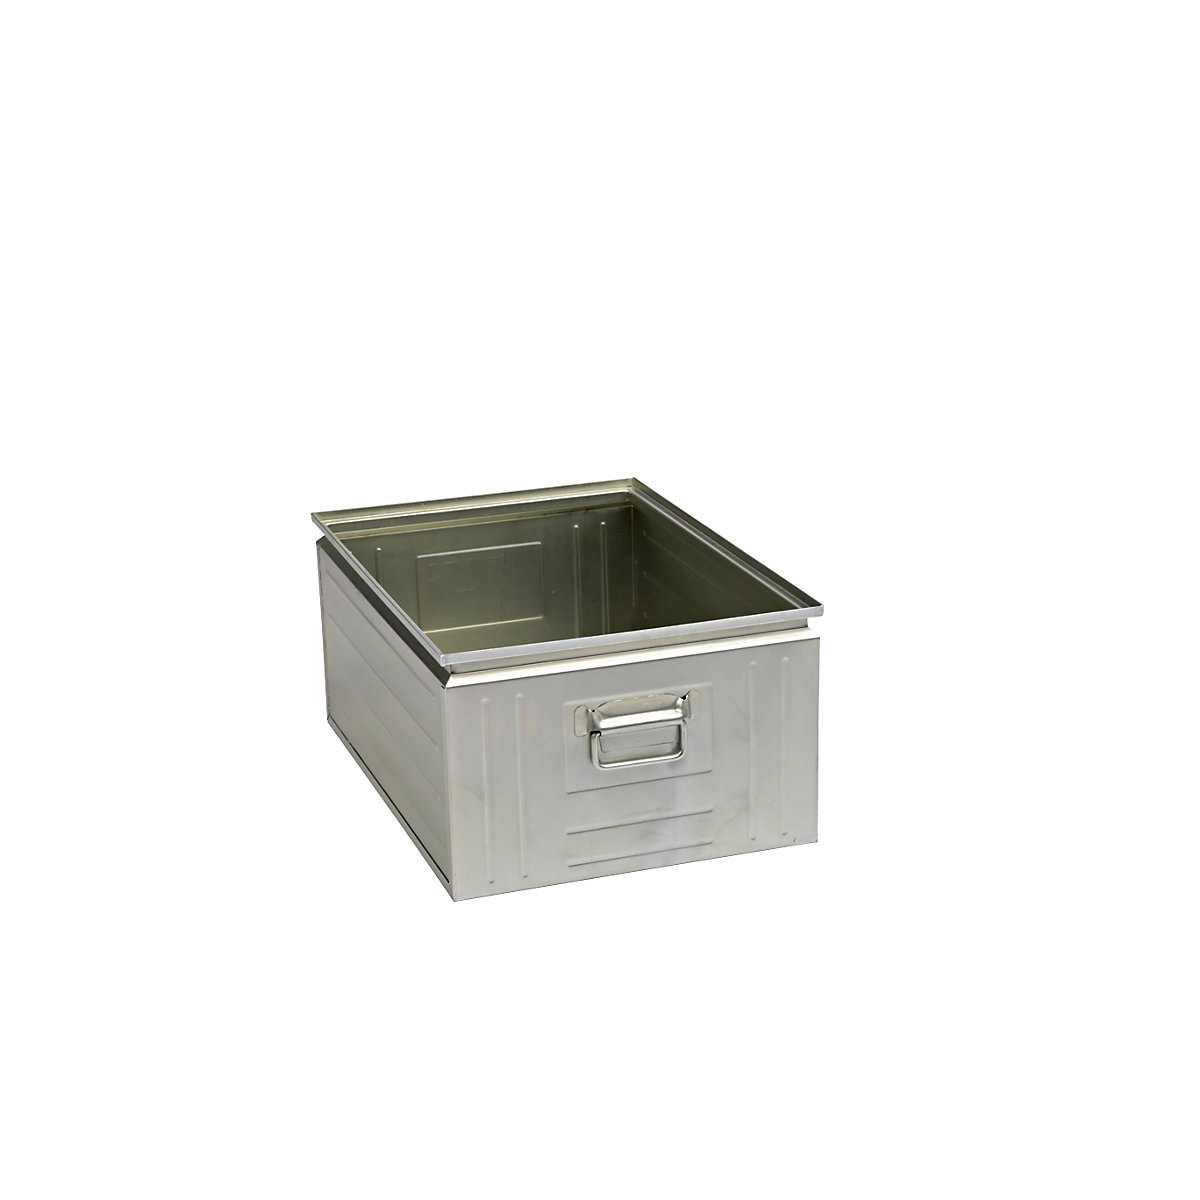 Stacking container made of sheet steel, capacity approx. 80 l, zinc plated